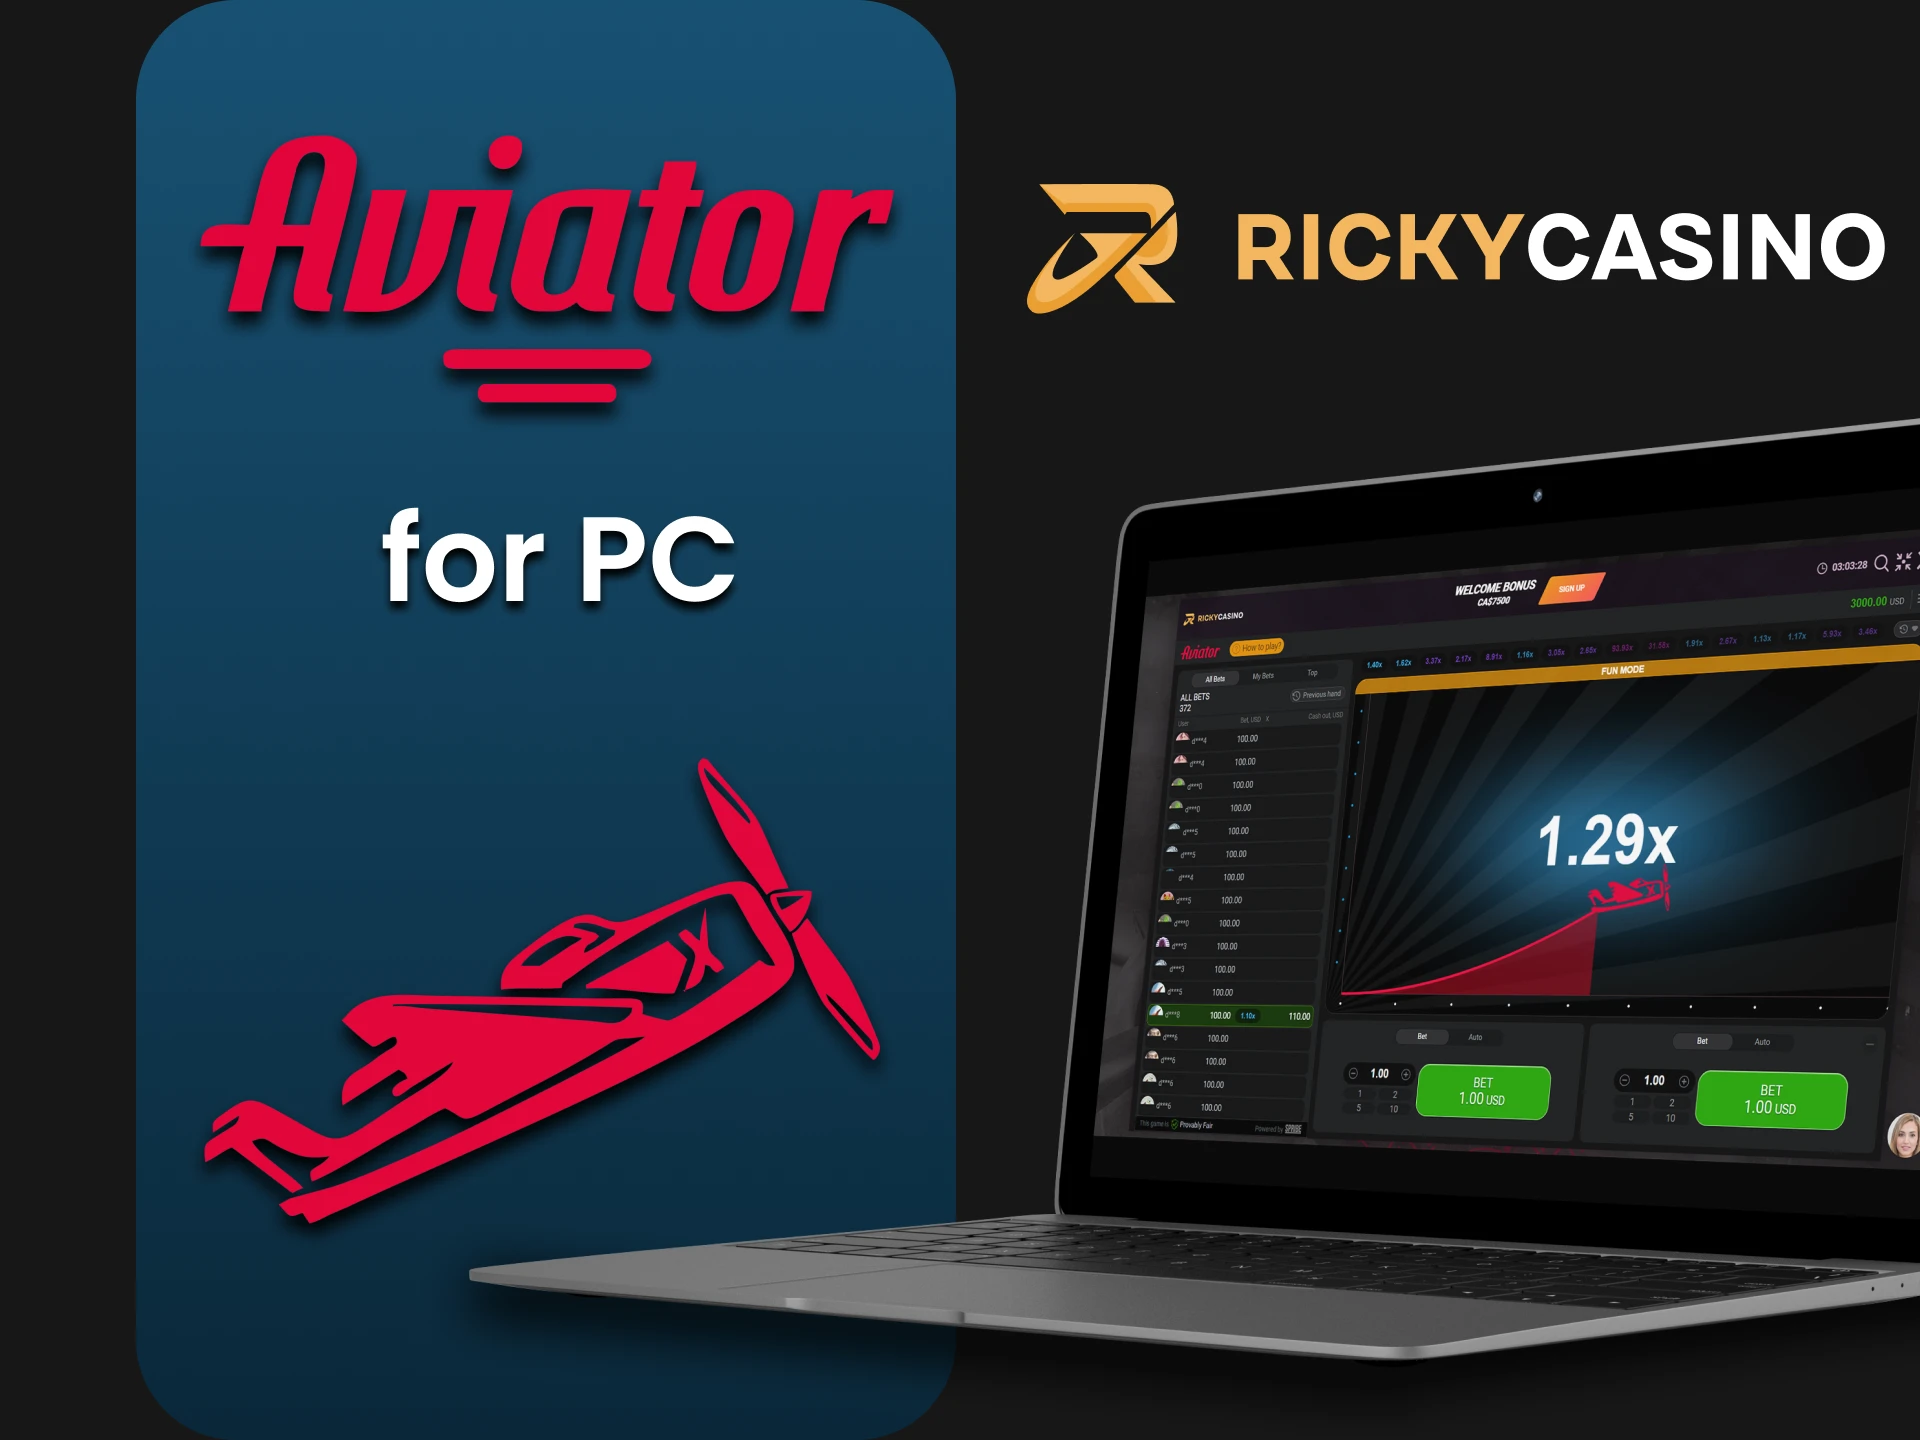 Use the PC version of the site to play Aviator at Ricky Casino.